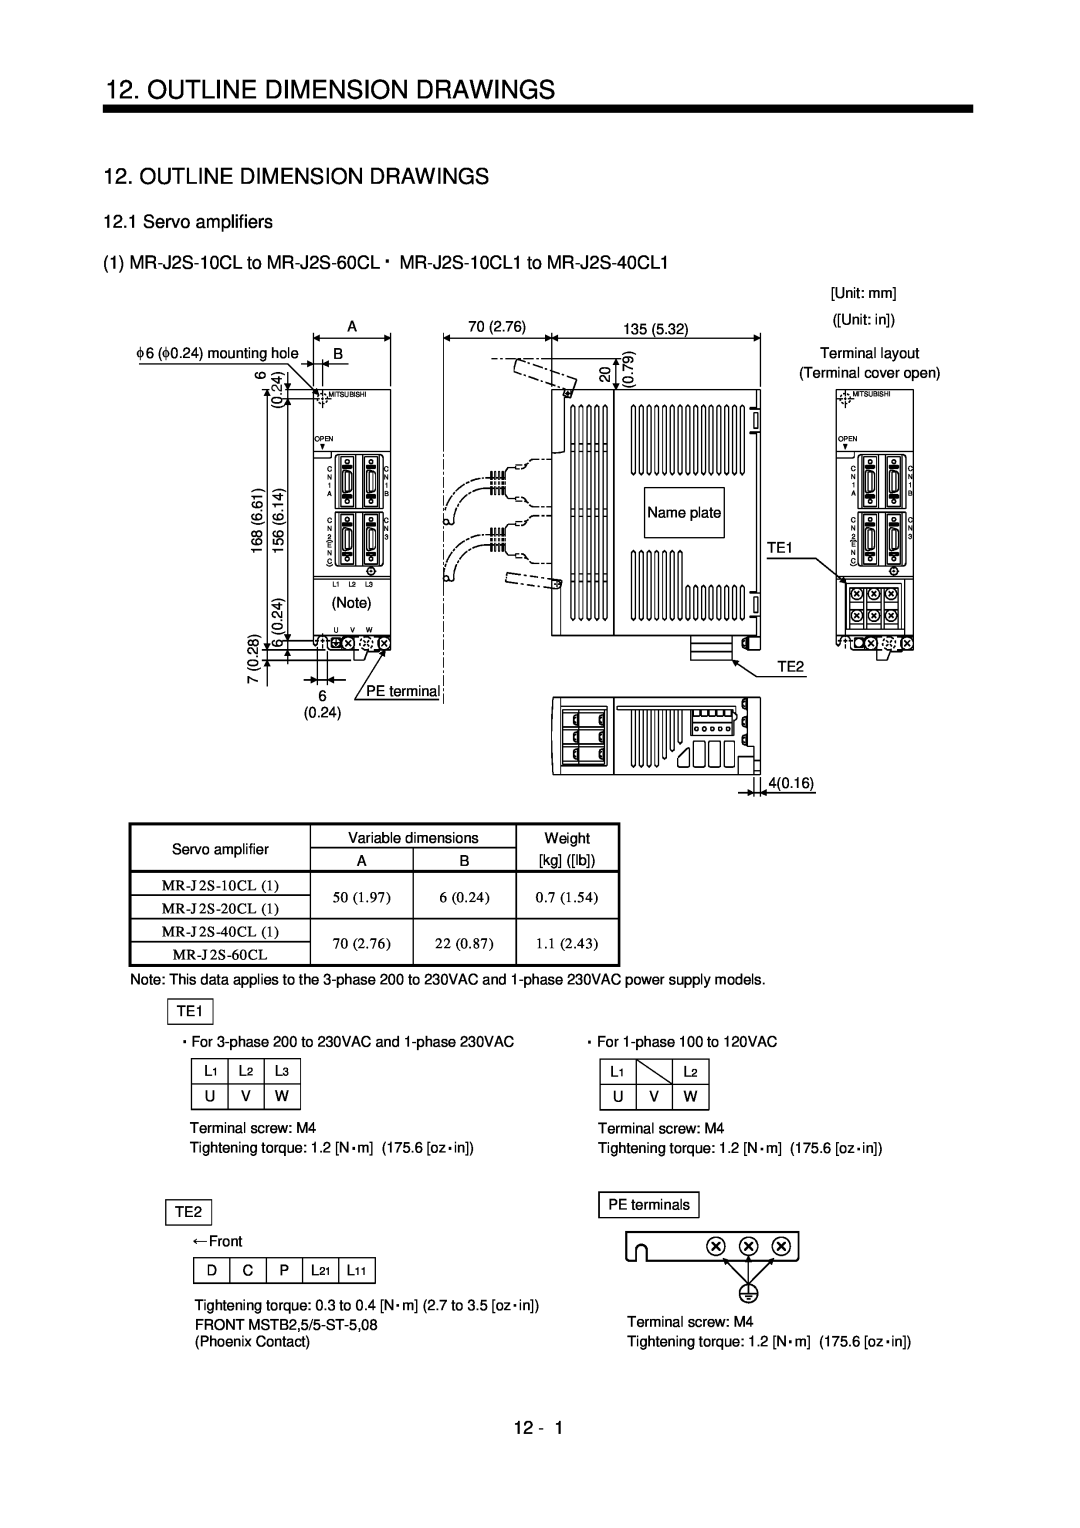 Mitsubishi Electronics MR-J2S- CL specifications Outline Dimension Drawings, Servo amplifiers 